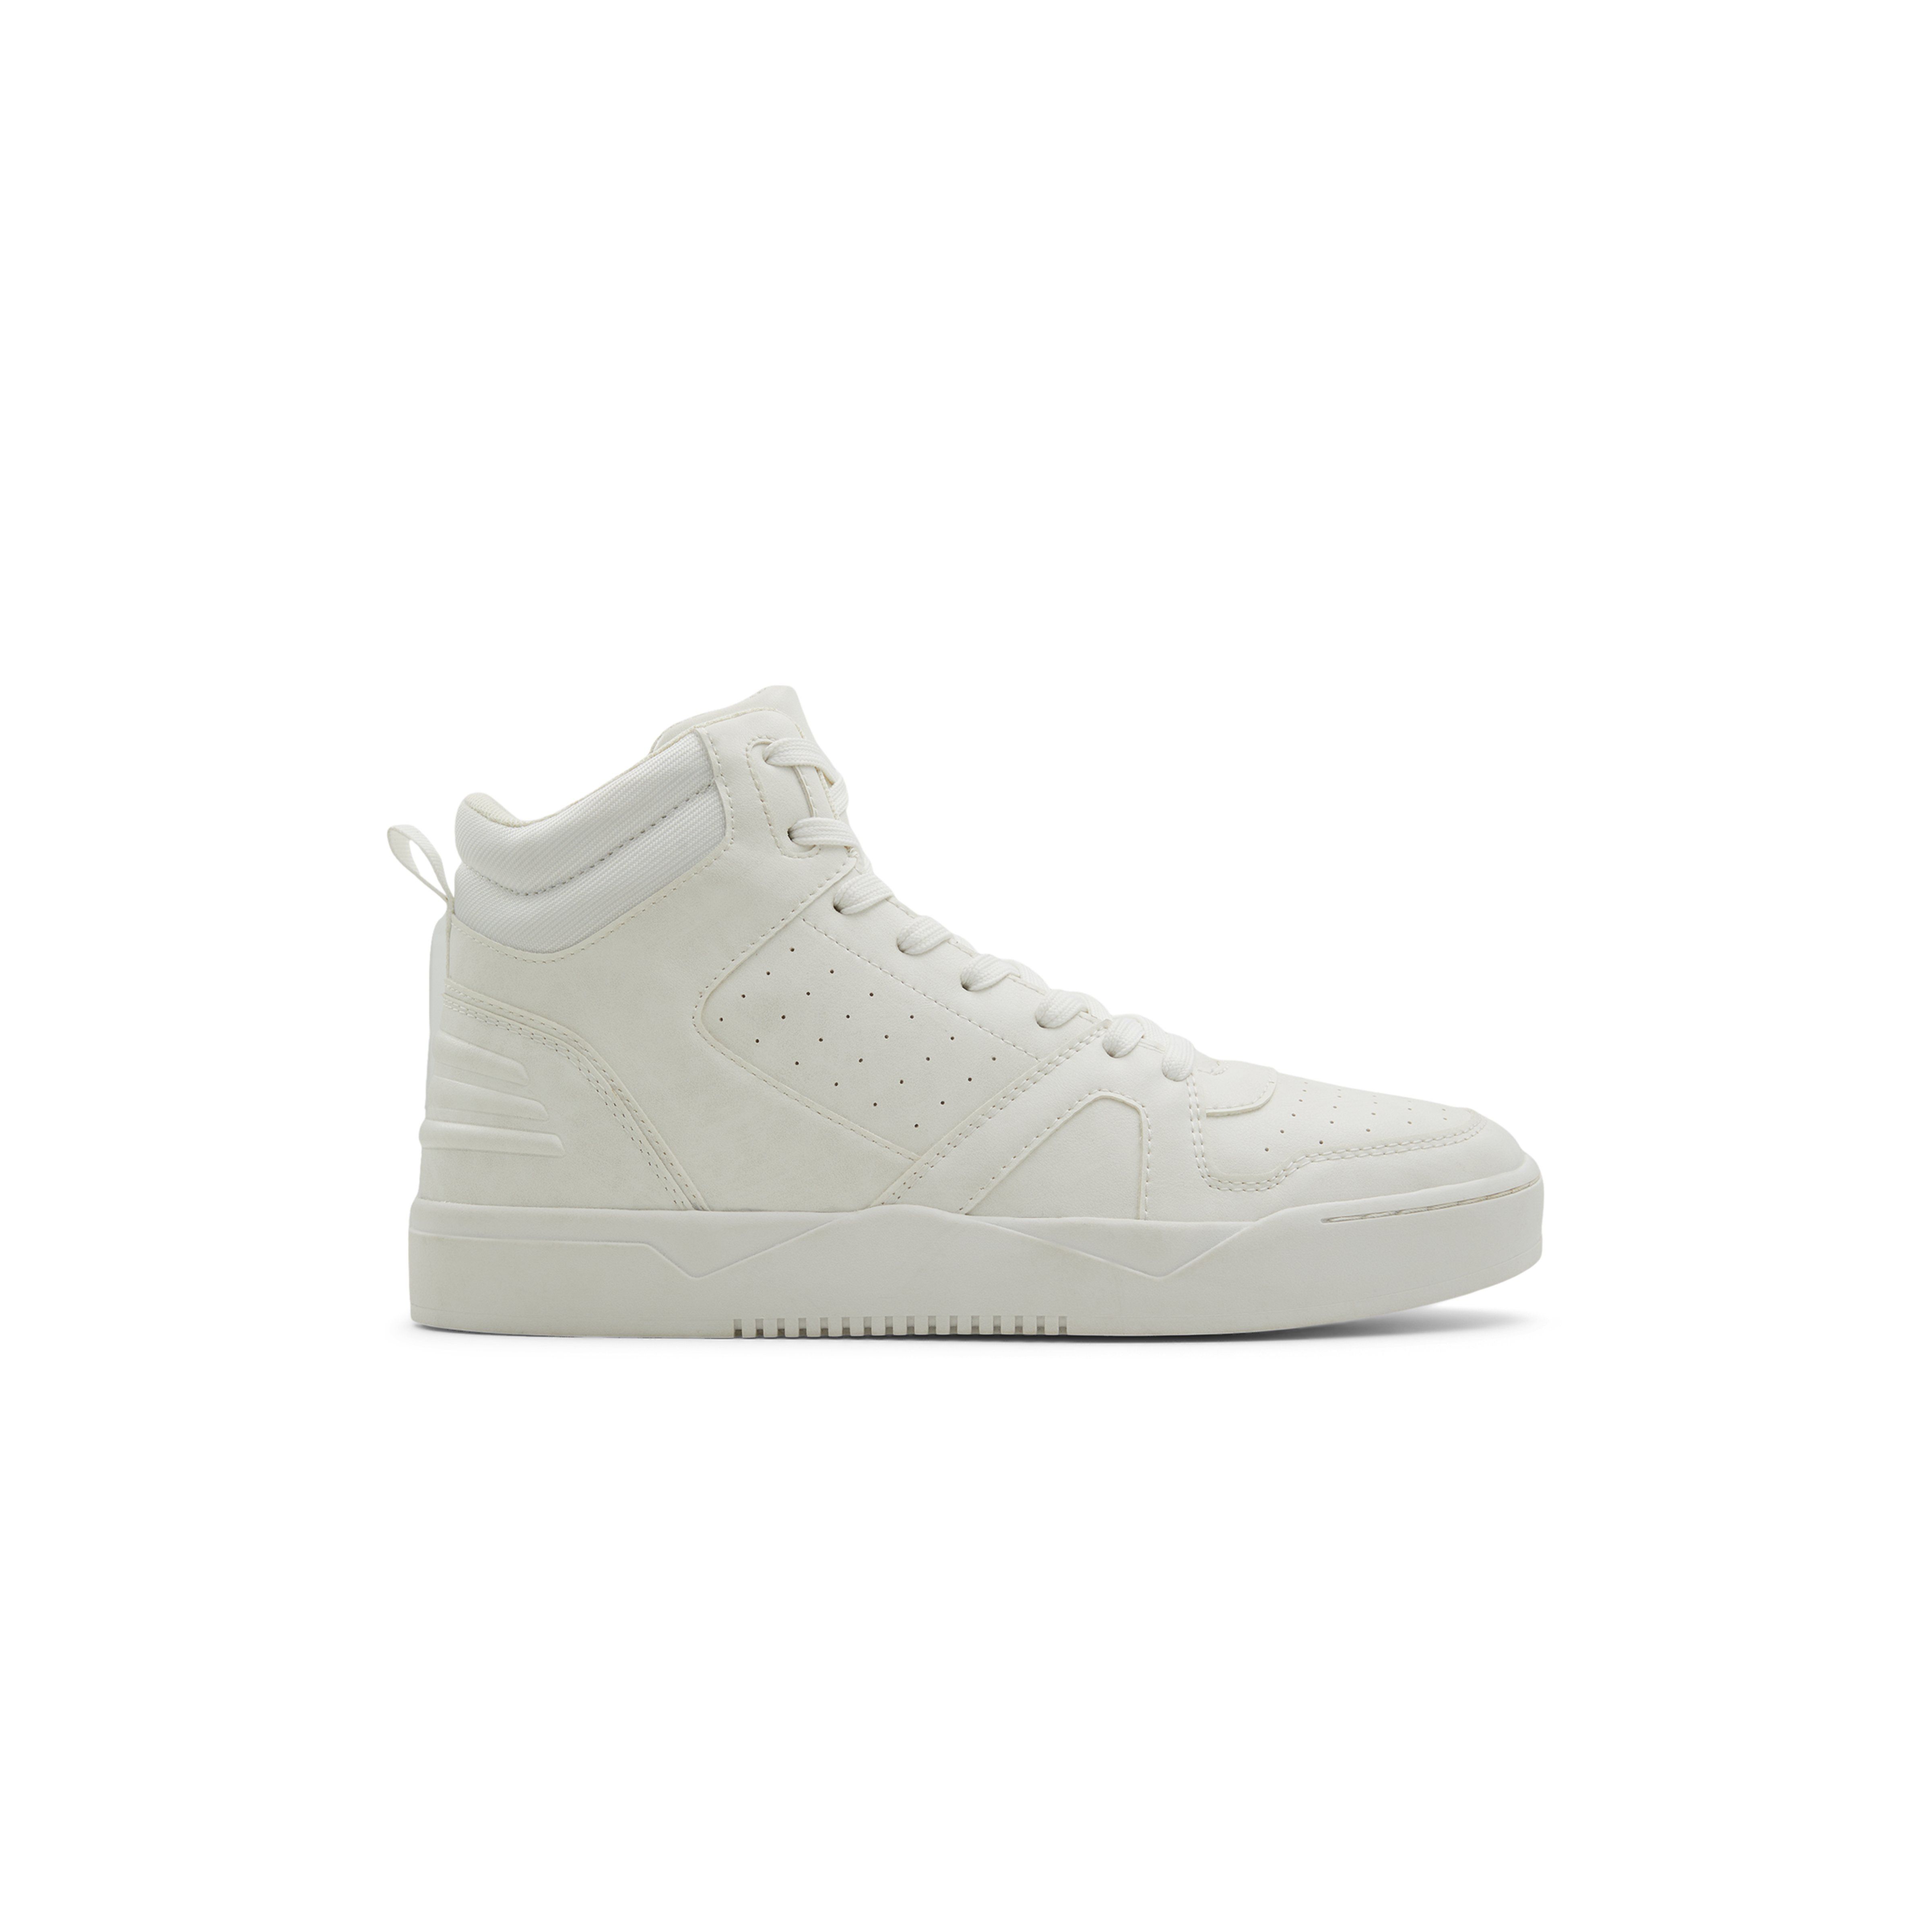 Cabalo Men's White High Top Sneaker image number 0